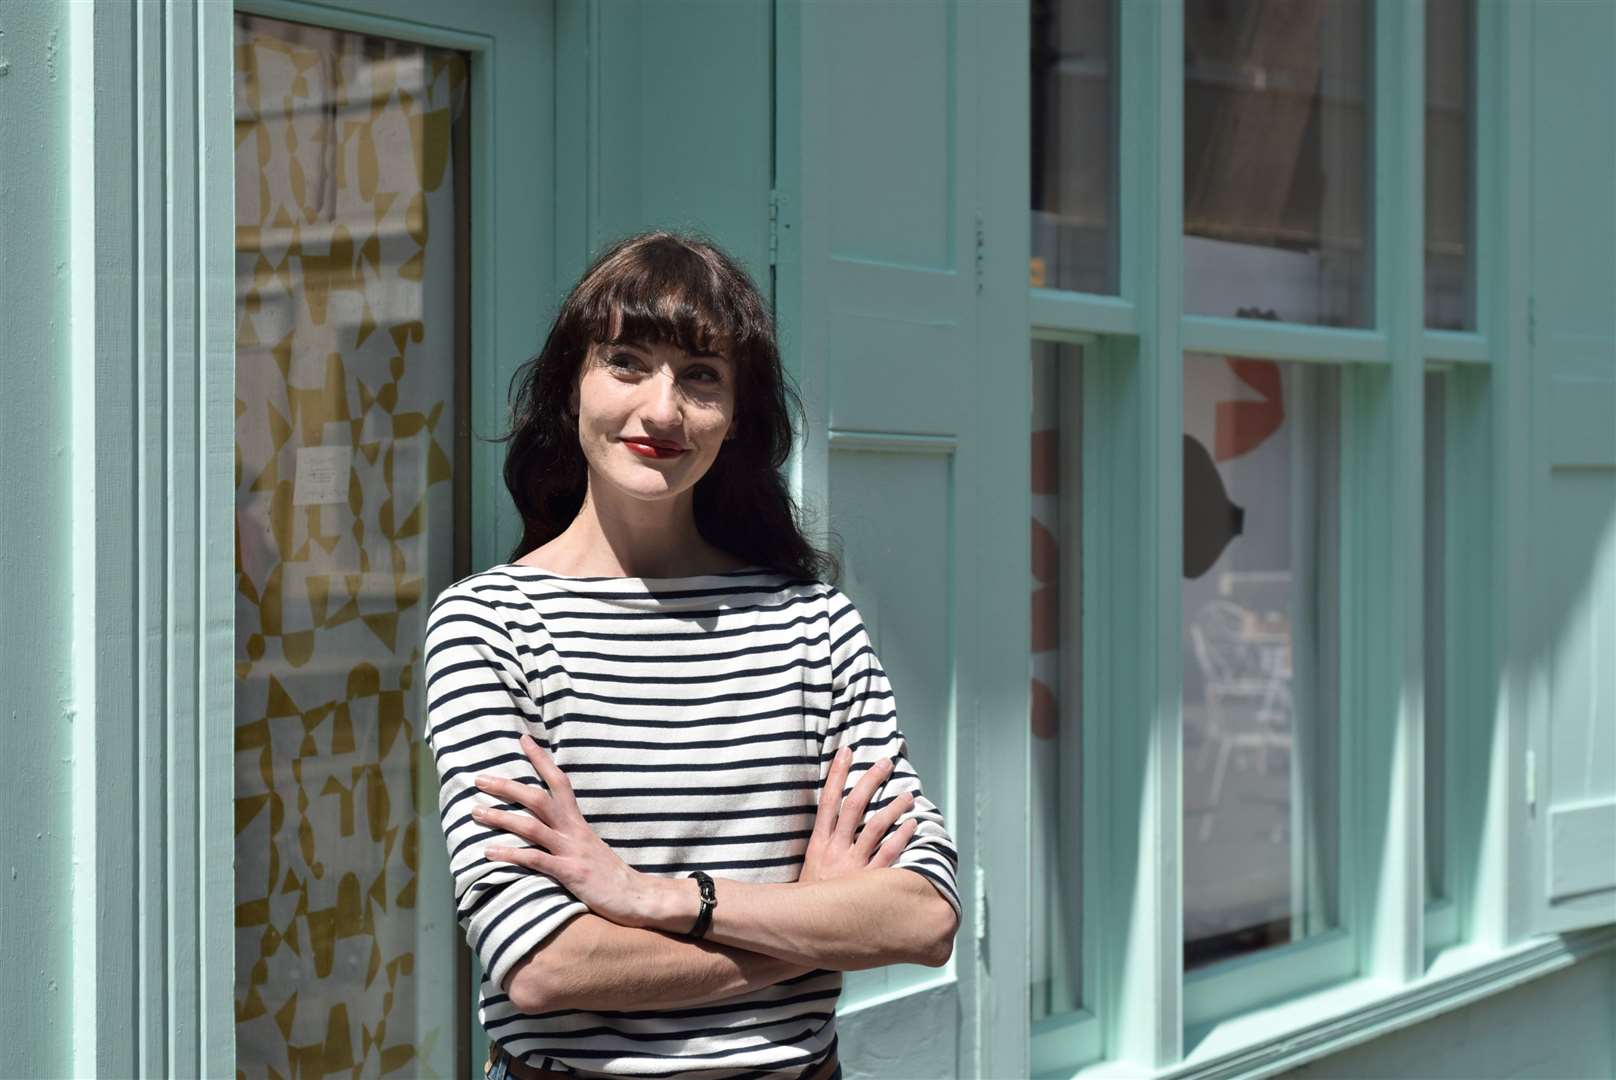 Francesca Wilkins, who is set to open a new bookshop in Margate's old town. Picture: Paddy Screech (11054012)